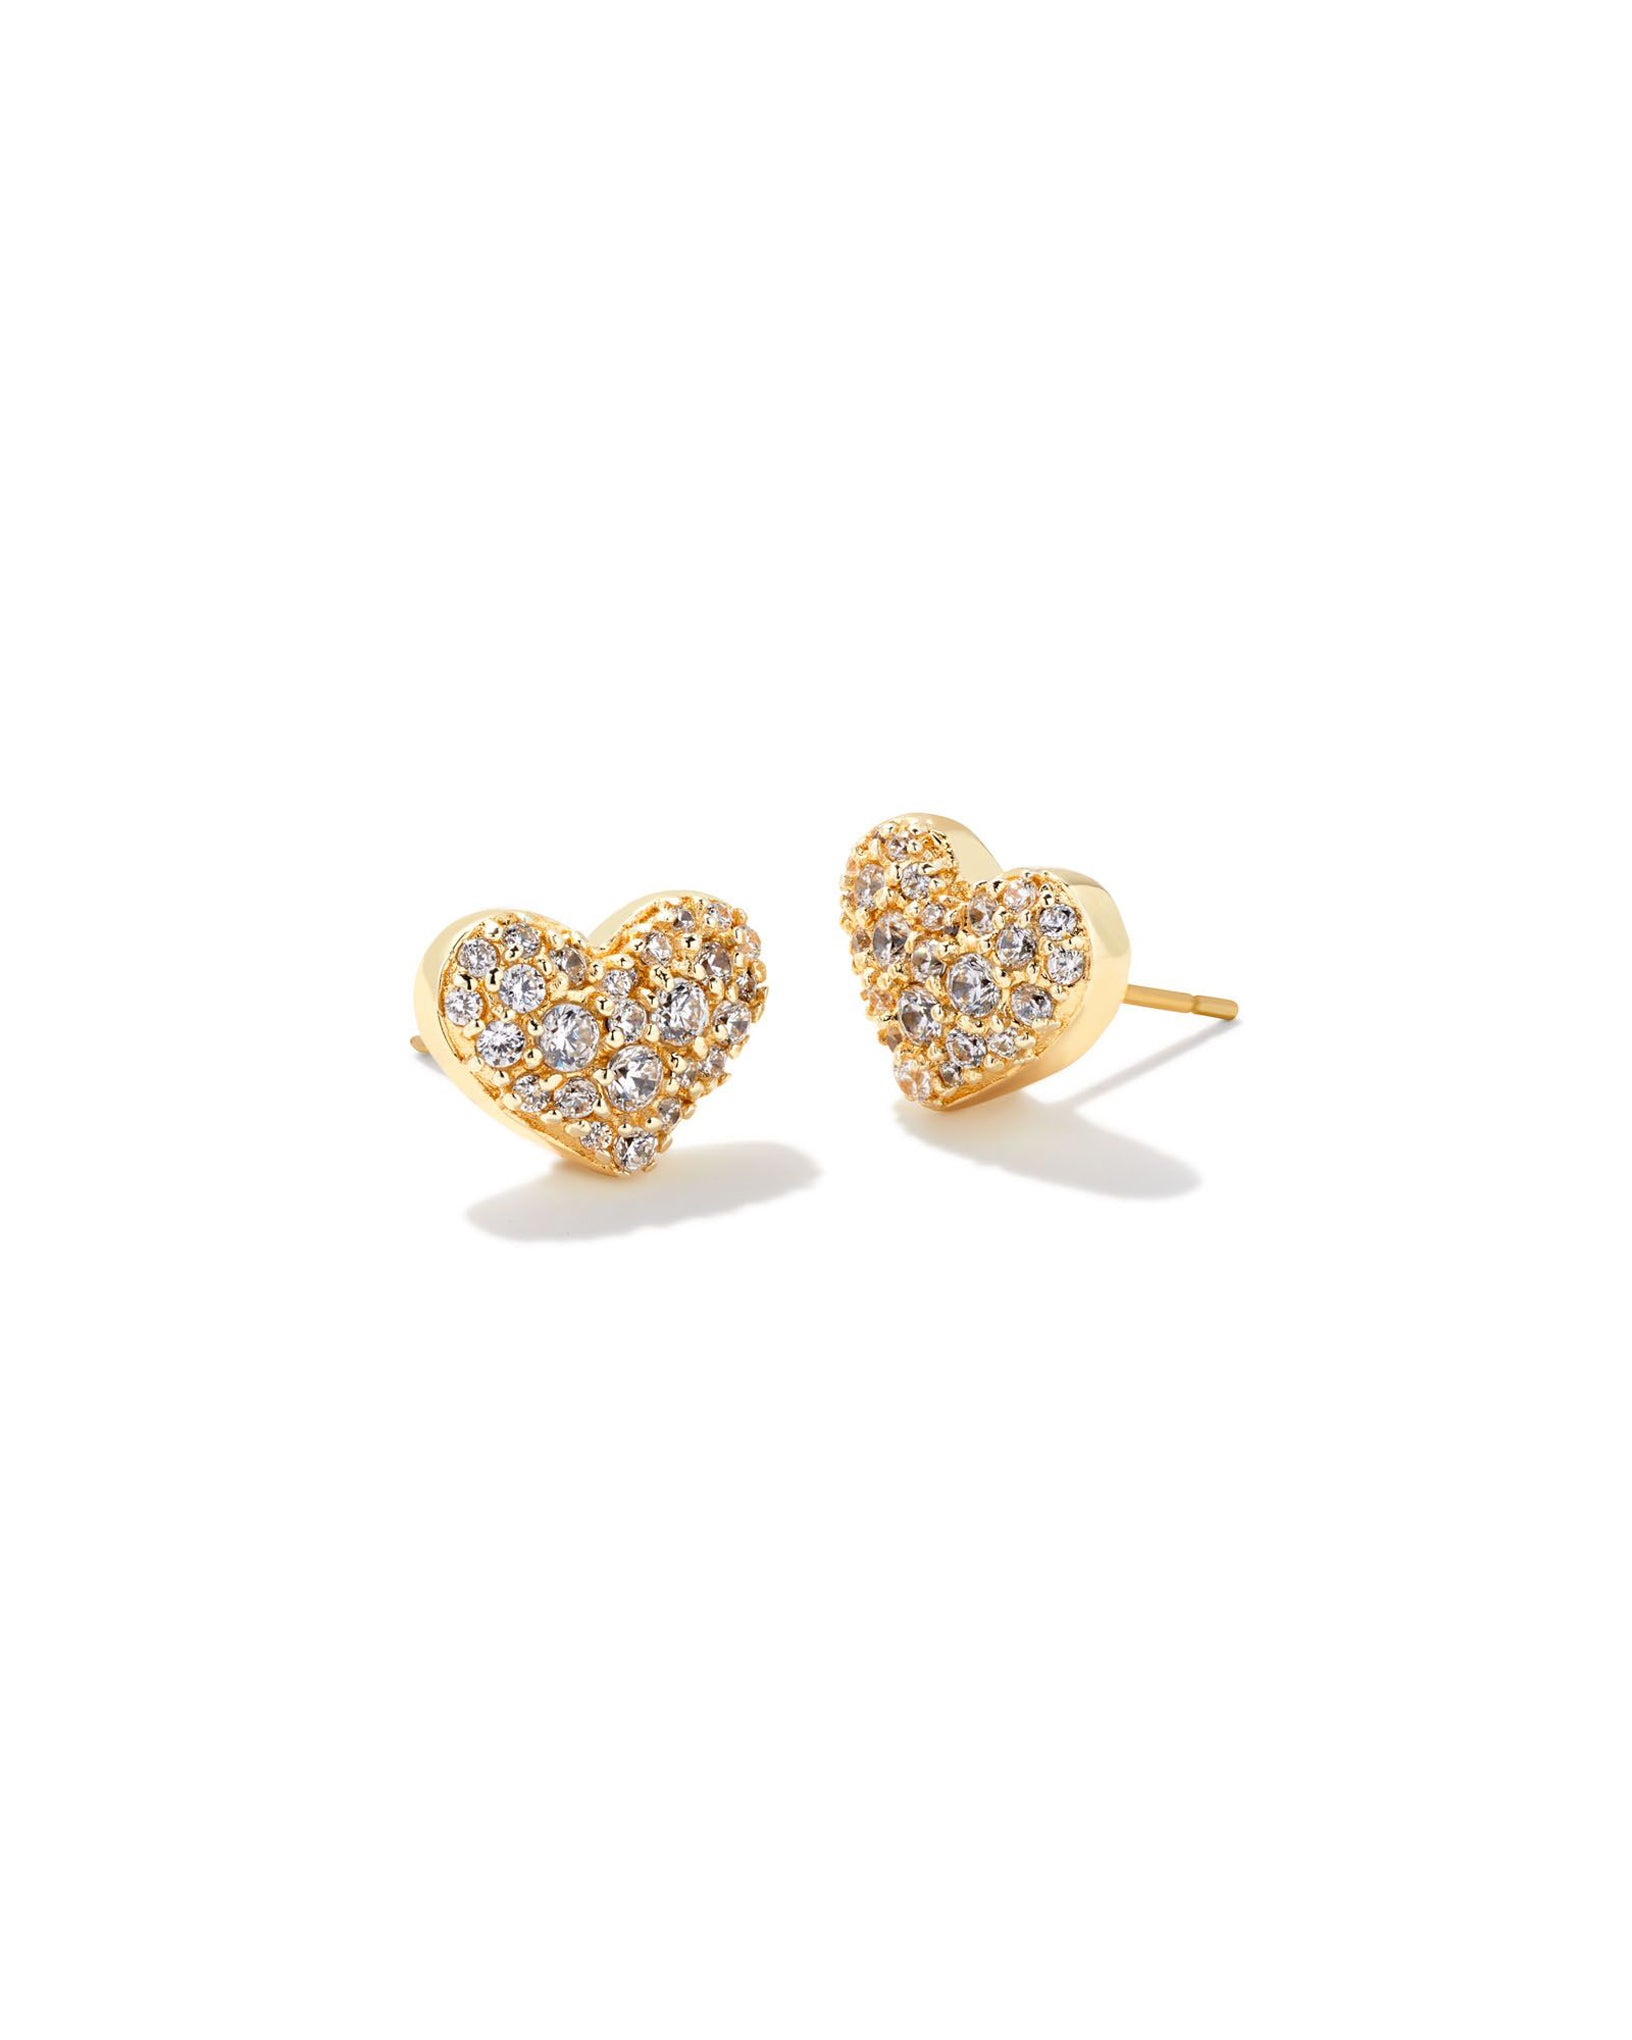 Kendra Scott Ari Pave Crystal Heart Stud Earrings in White Crystal and Gold Plated